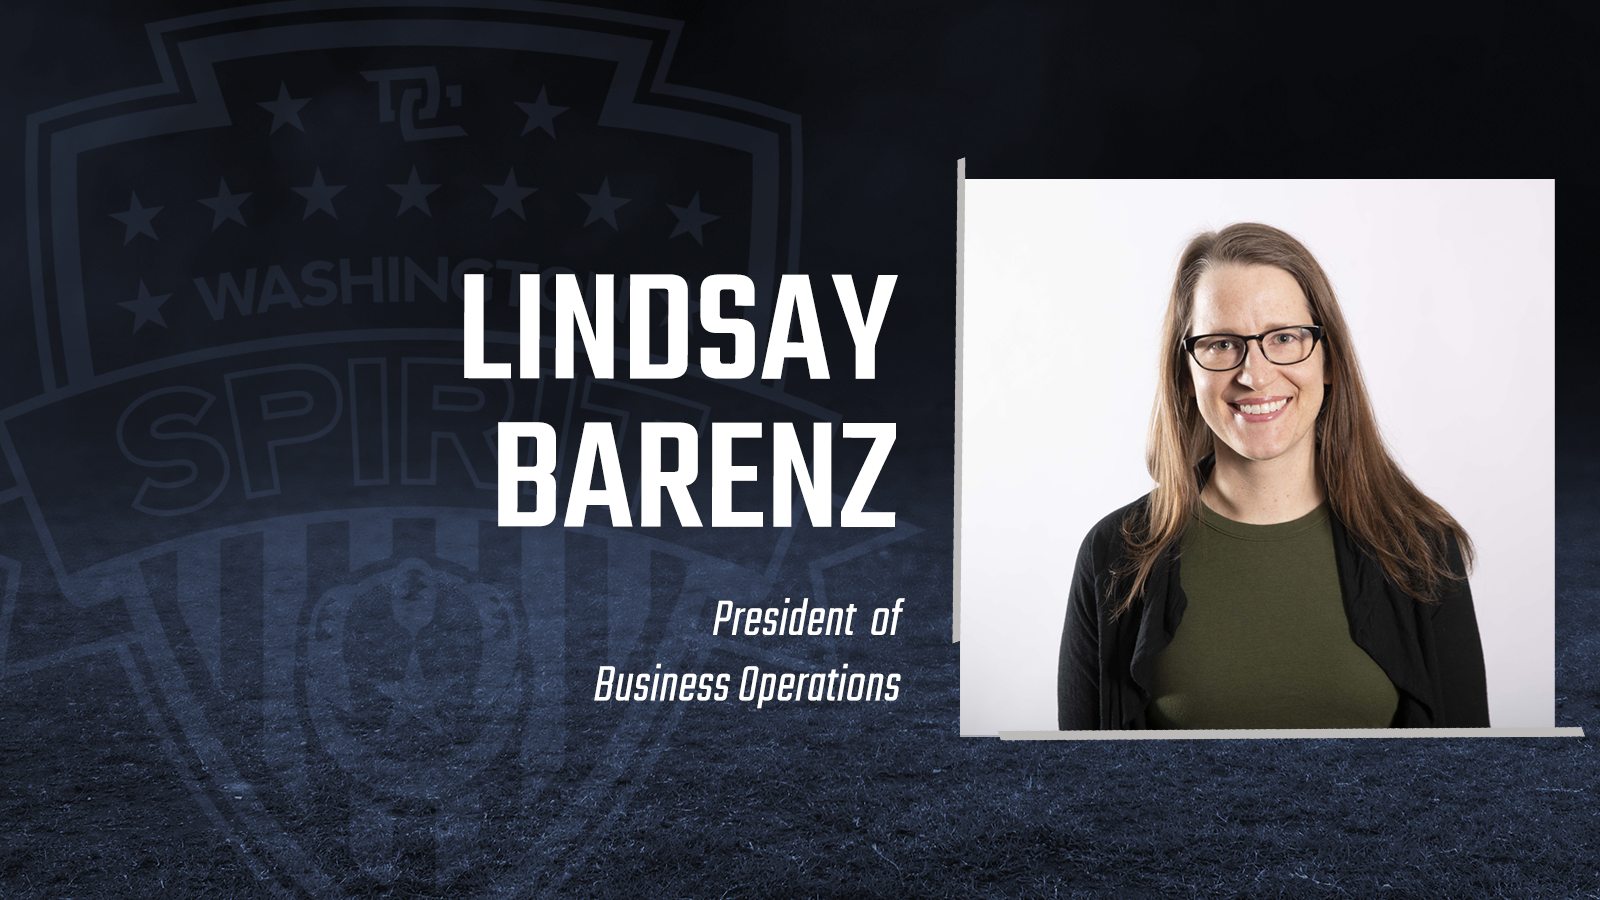 Washington Spirit Appoint Lindsay Barenz as President of Business Operations Featured Image